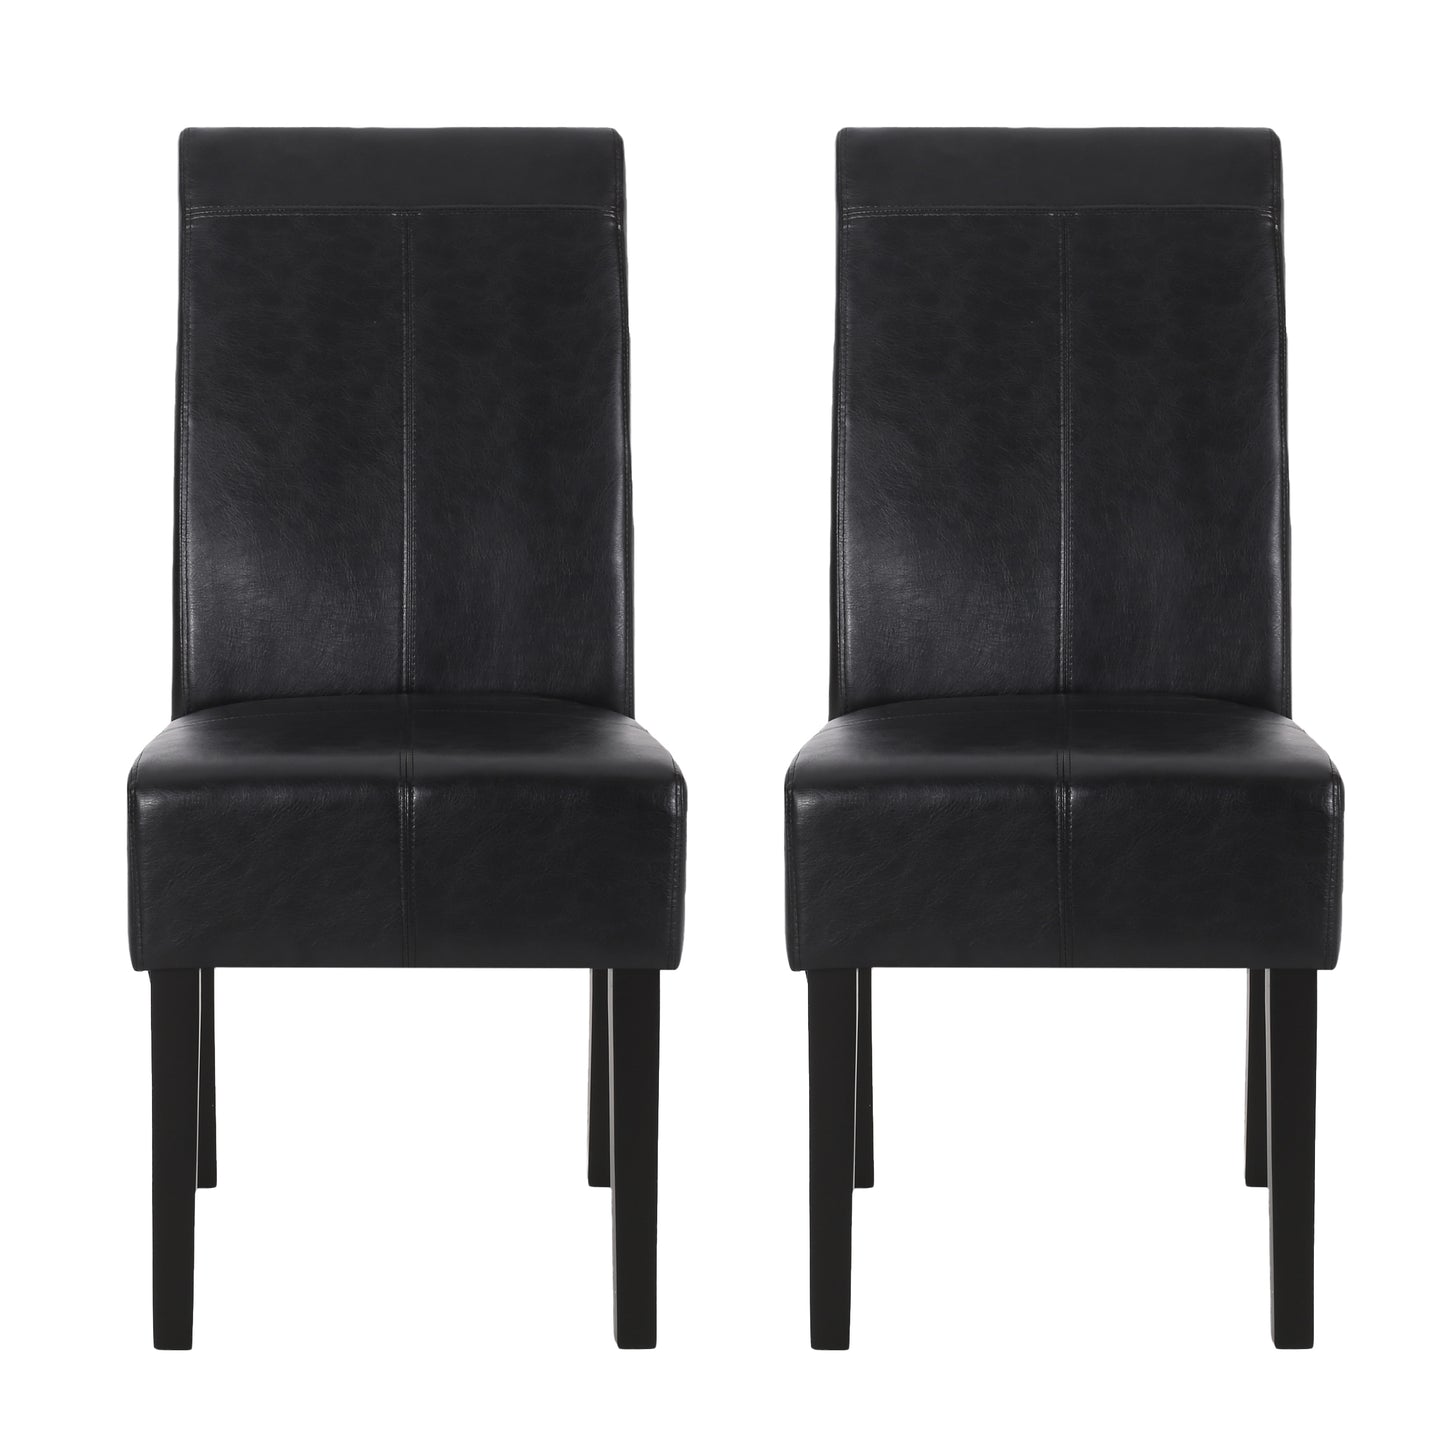 Percival Contemporary Upholstered T-Stitch Dining Chairs, Set of 2